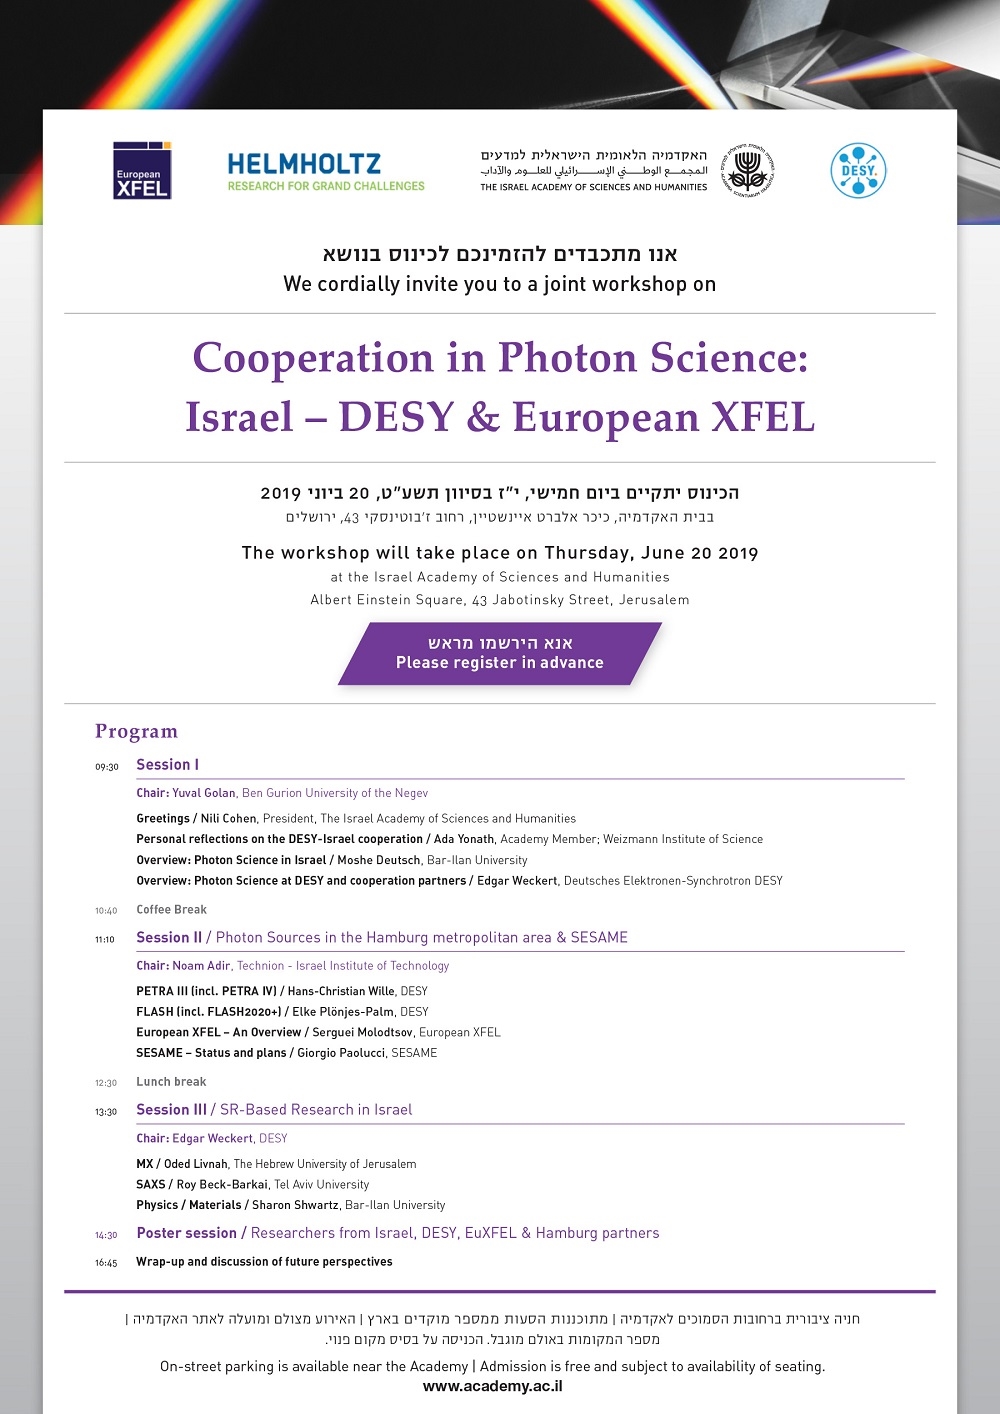 Joint Workship: Cooperation in Photon Science - Israel - DESY & European XFEL